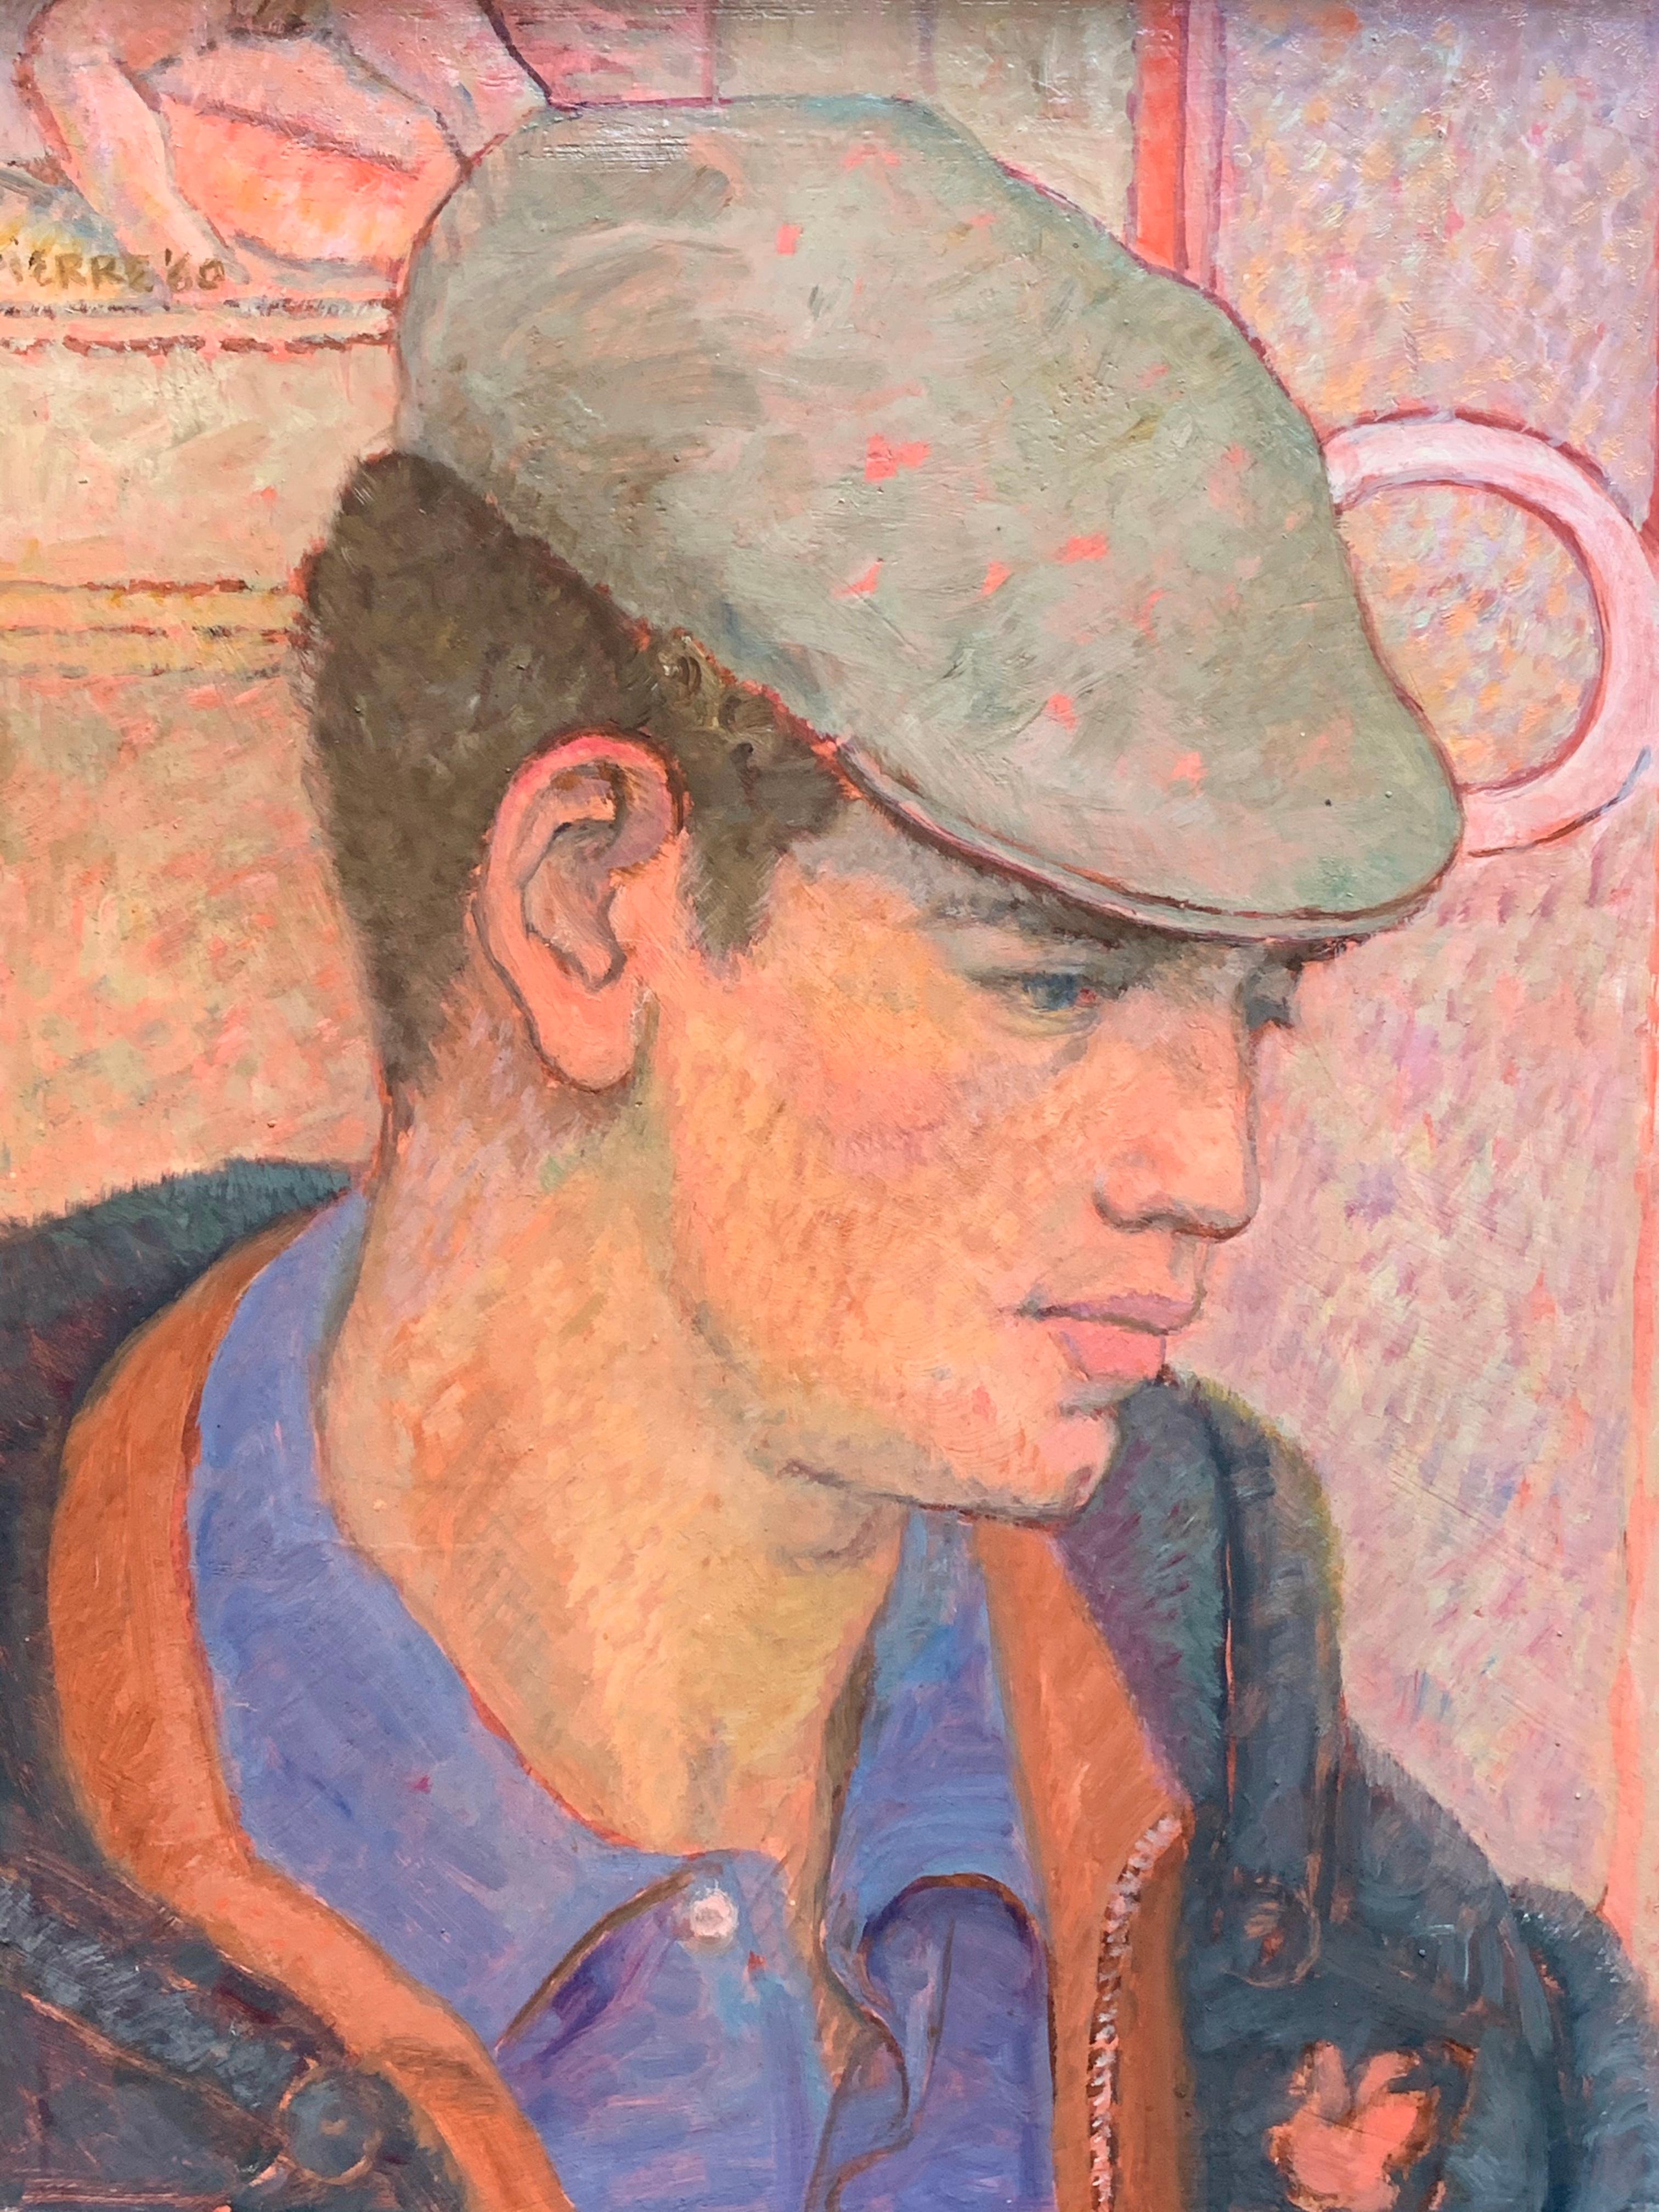 Peter Samuelson Portrait Painting - Modern British Portrait of a Handsome Young Gentleman in a Blue Shirt and Hat.